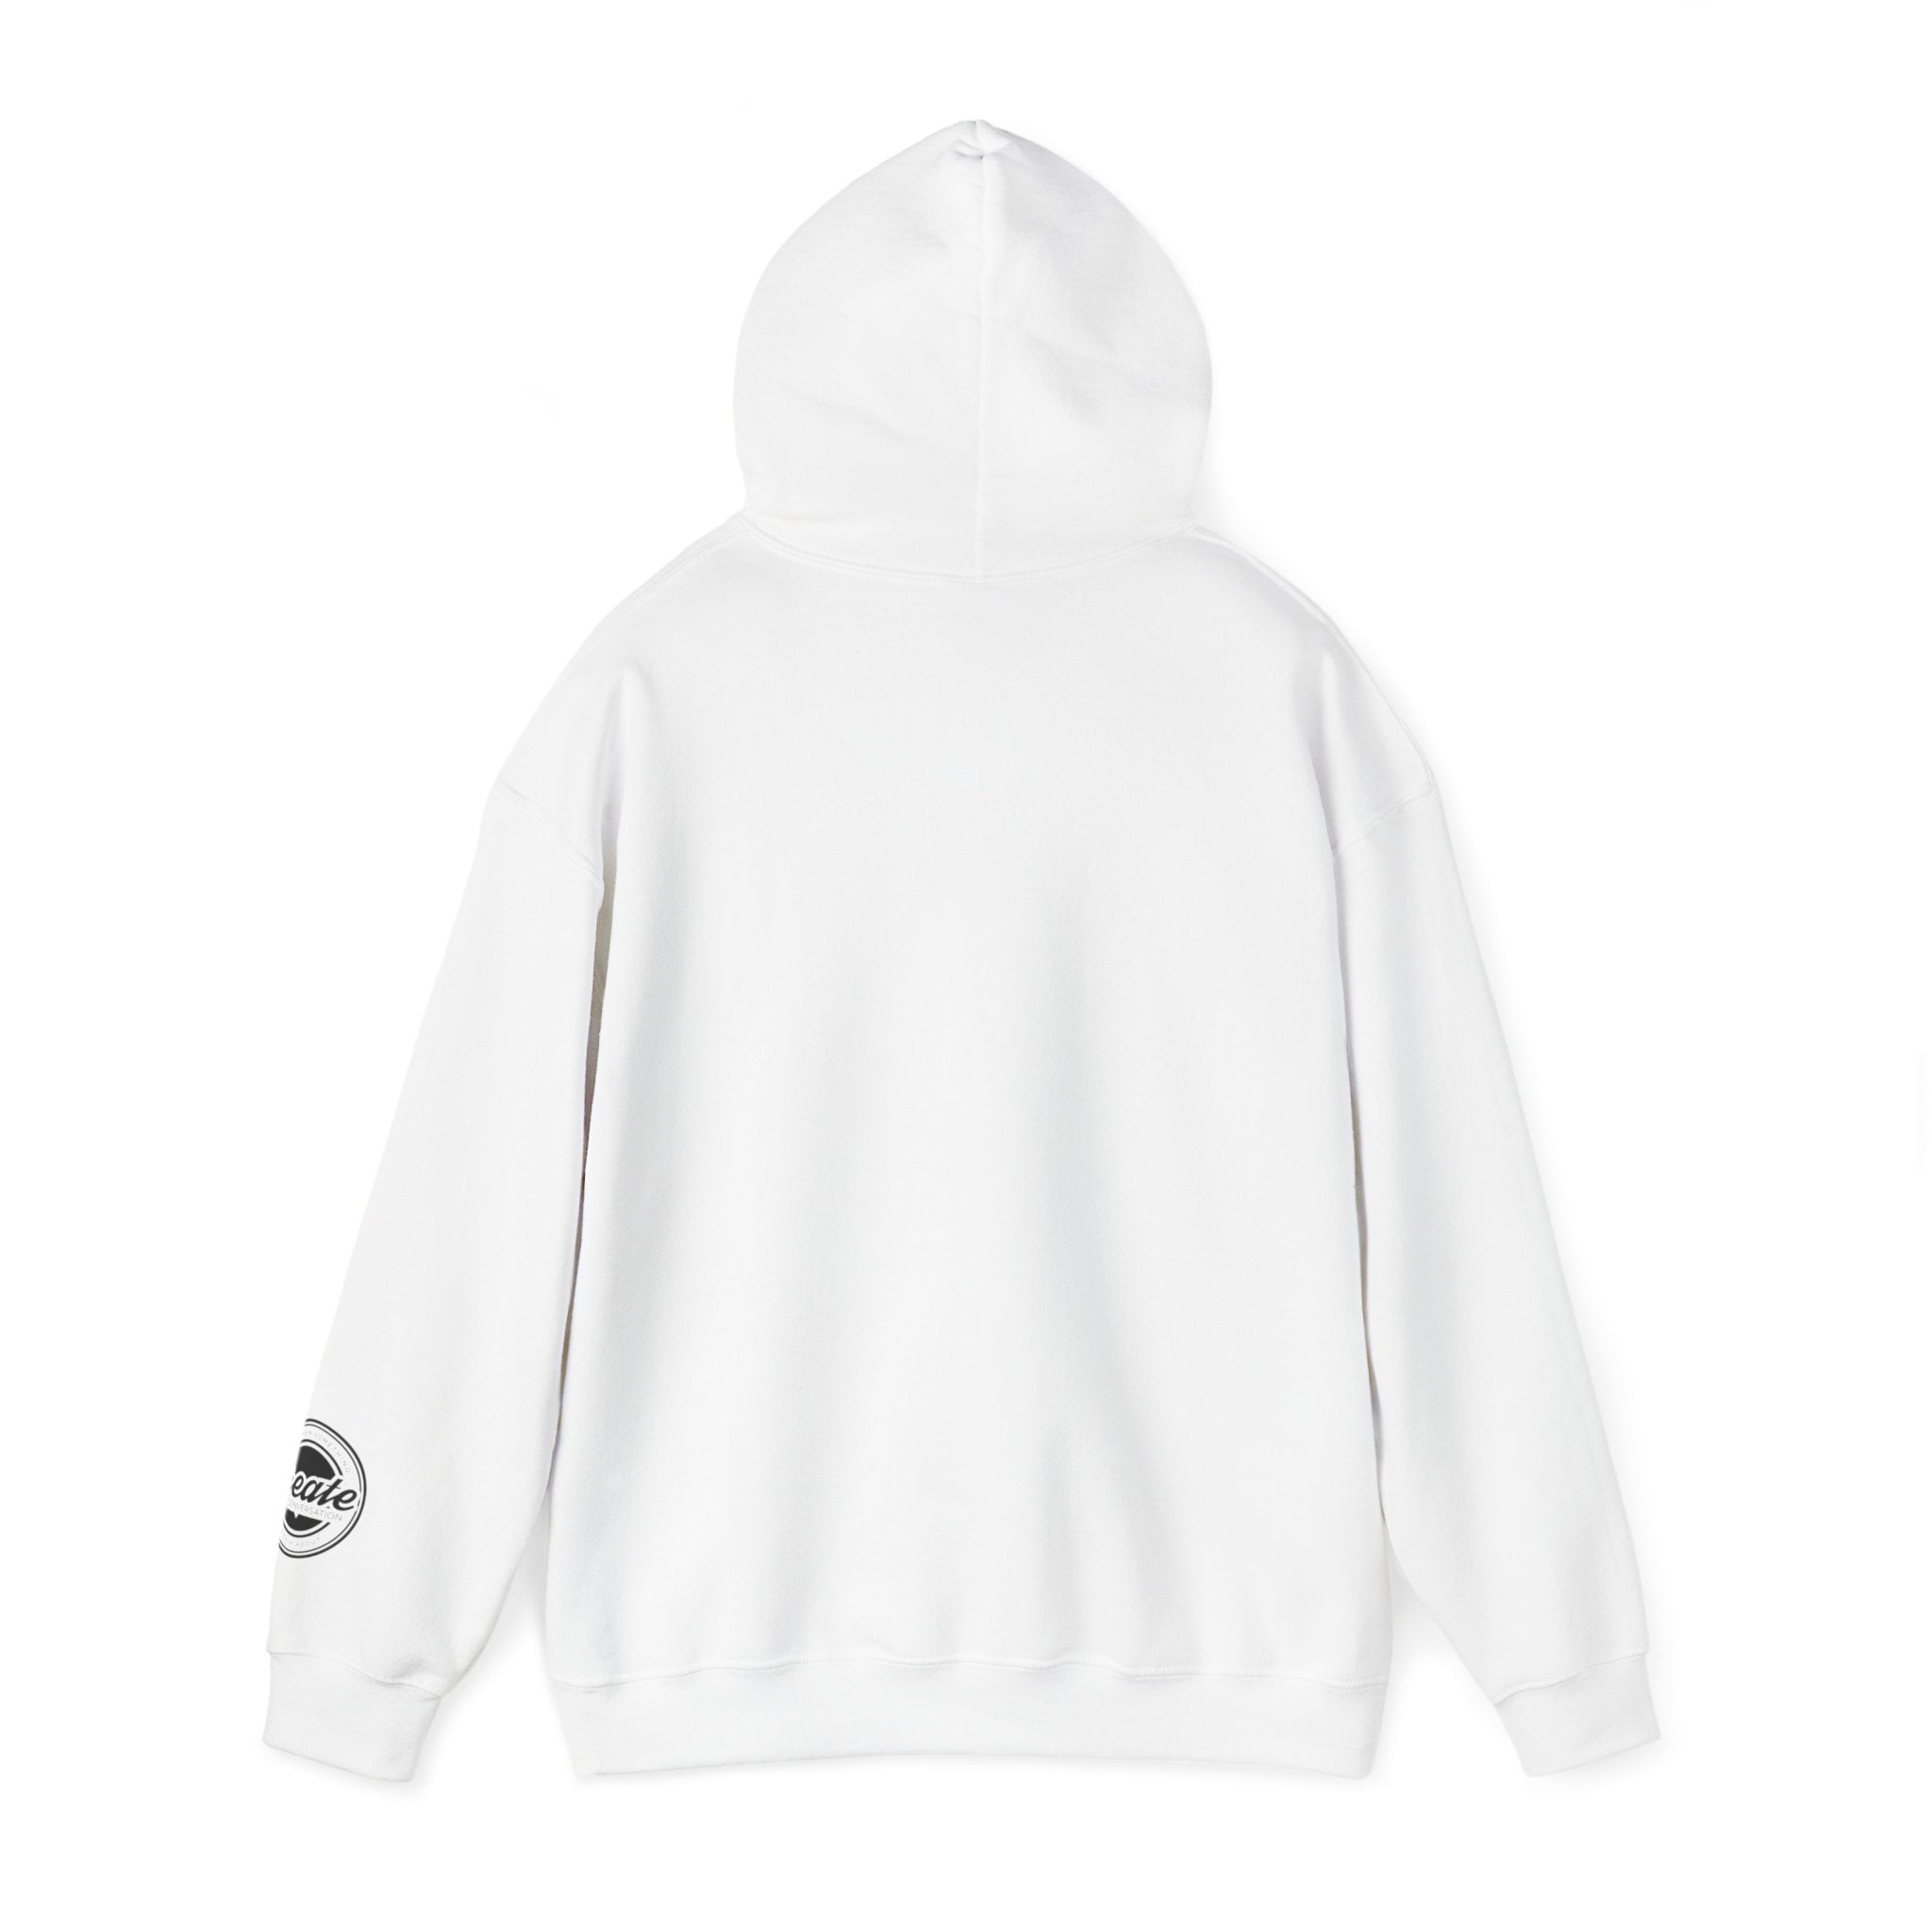 Only Bands Hooded Sweatshirt